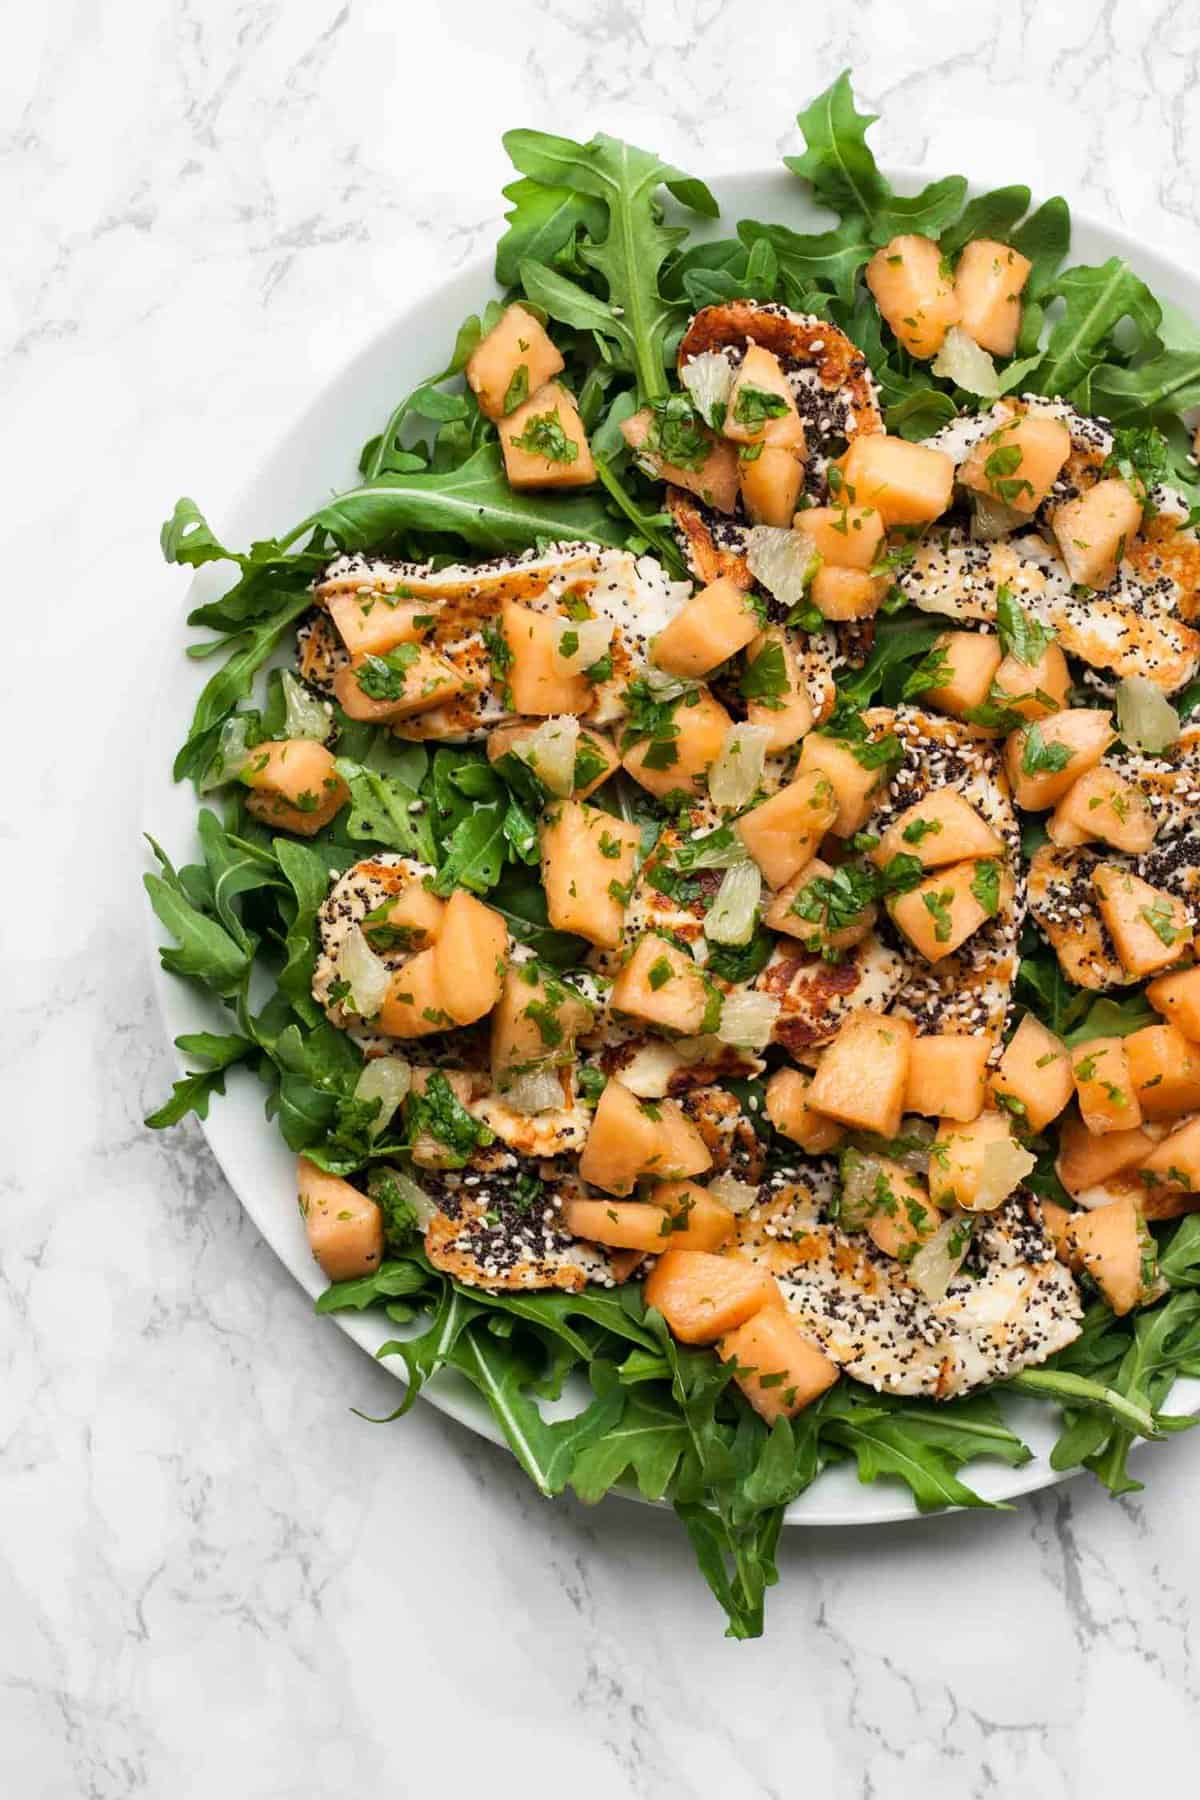 Cantaloupe, Lime and Halloumi Salad - a quick and simple appetizer/lunch recipe that is perfect for summer! | eatloveeats.com